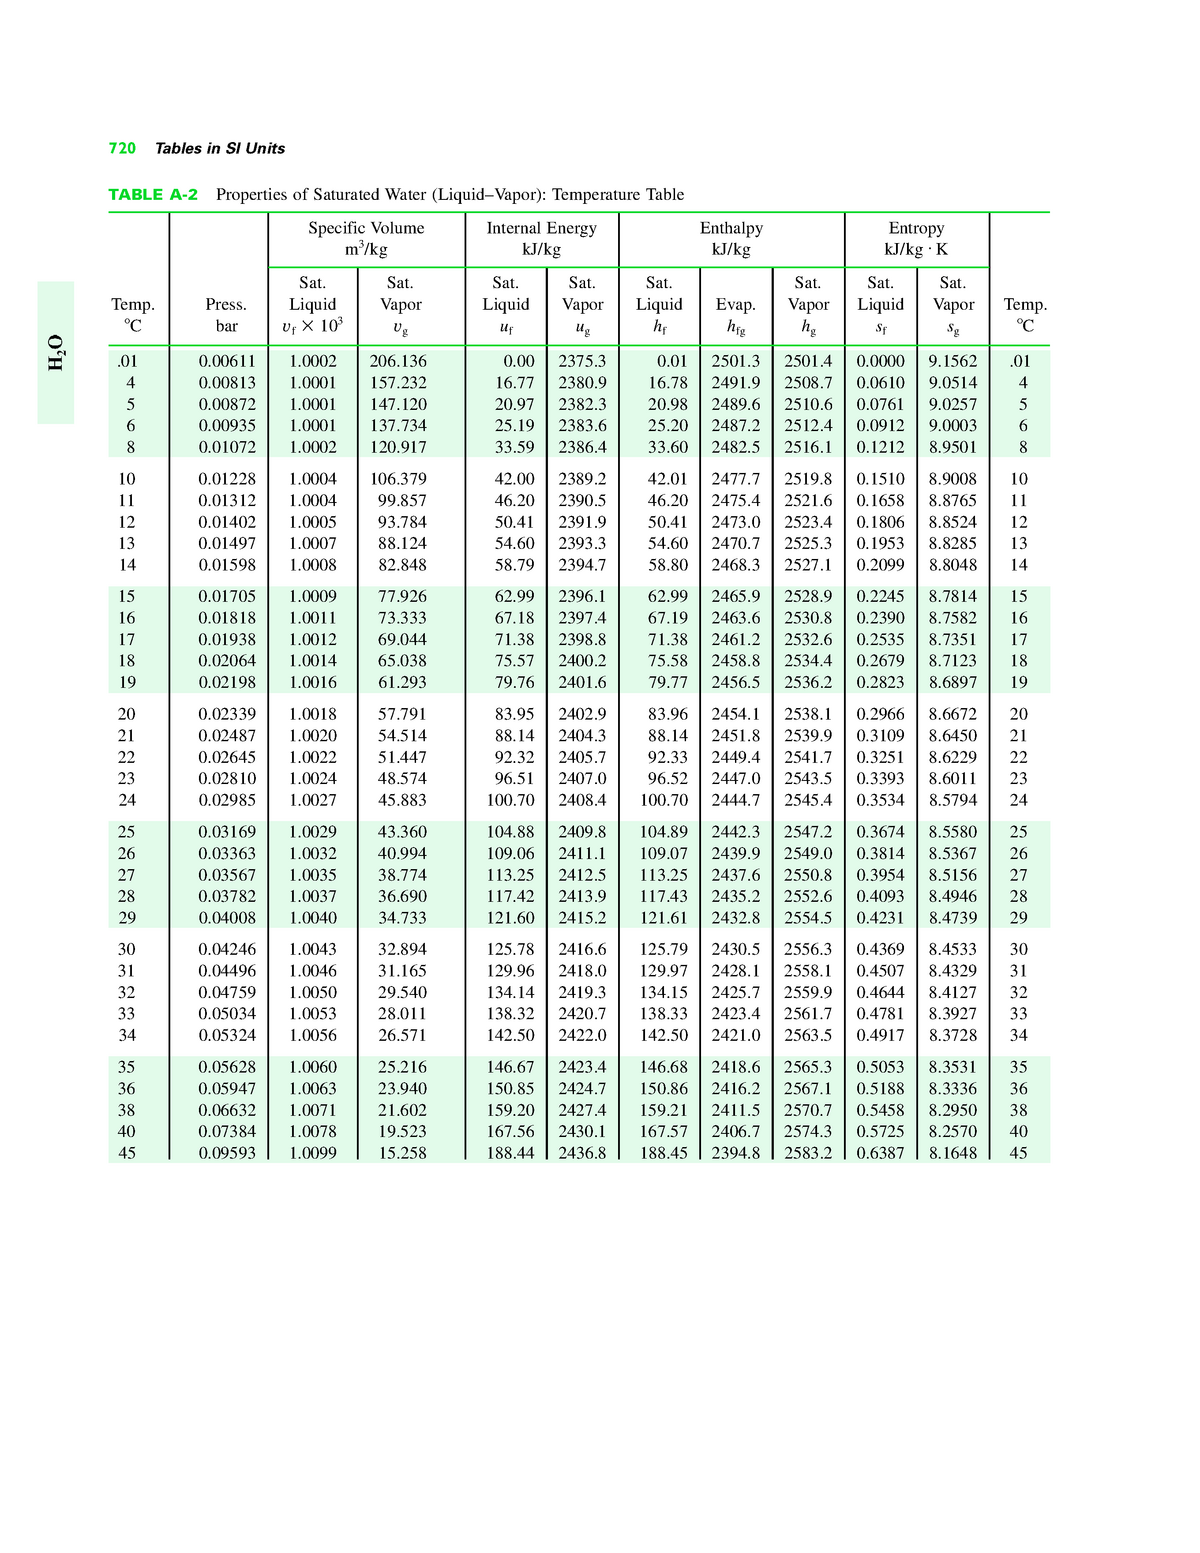 Property tables for steam фото 15